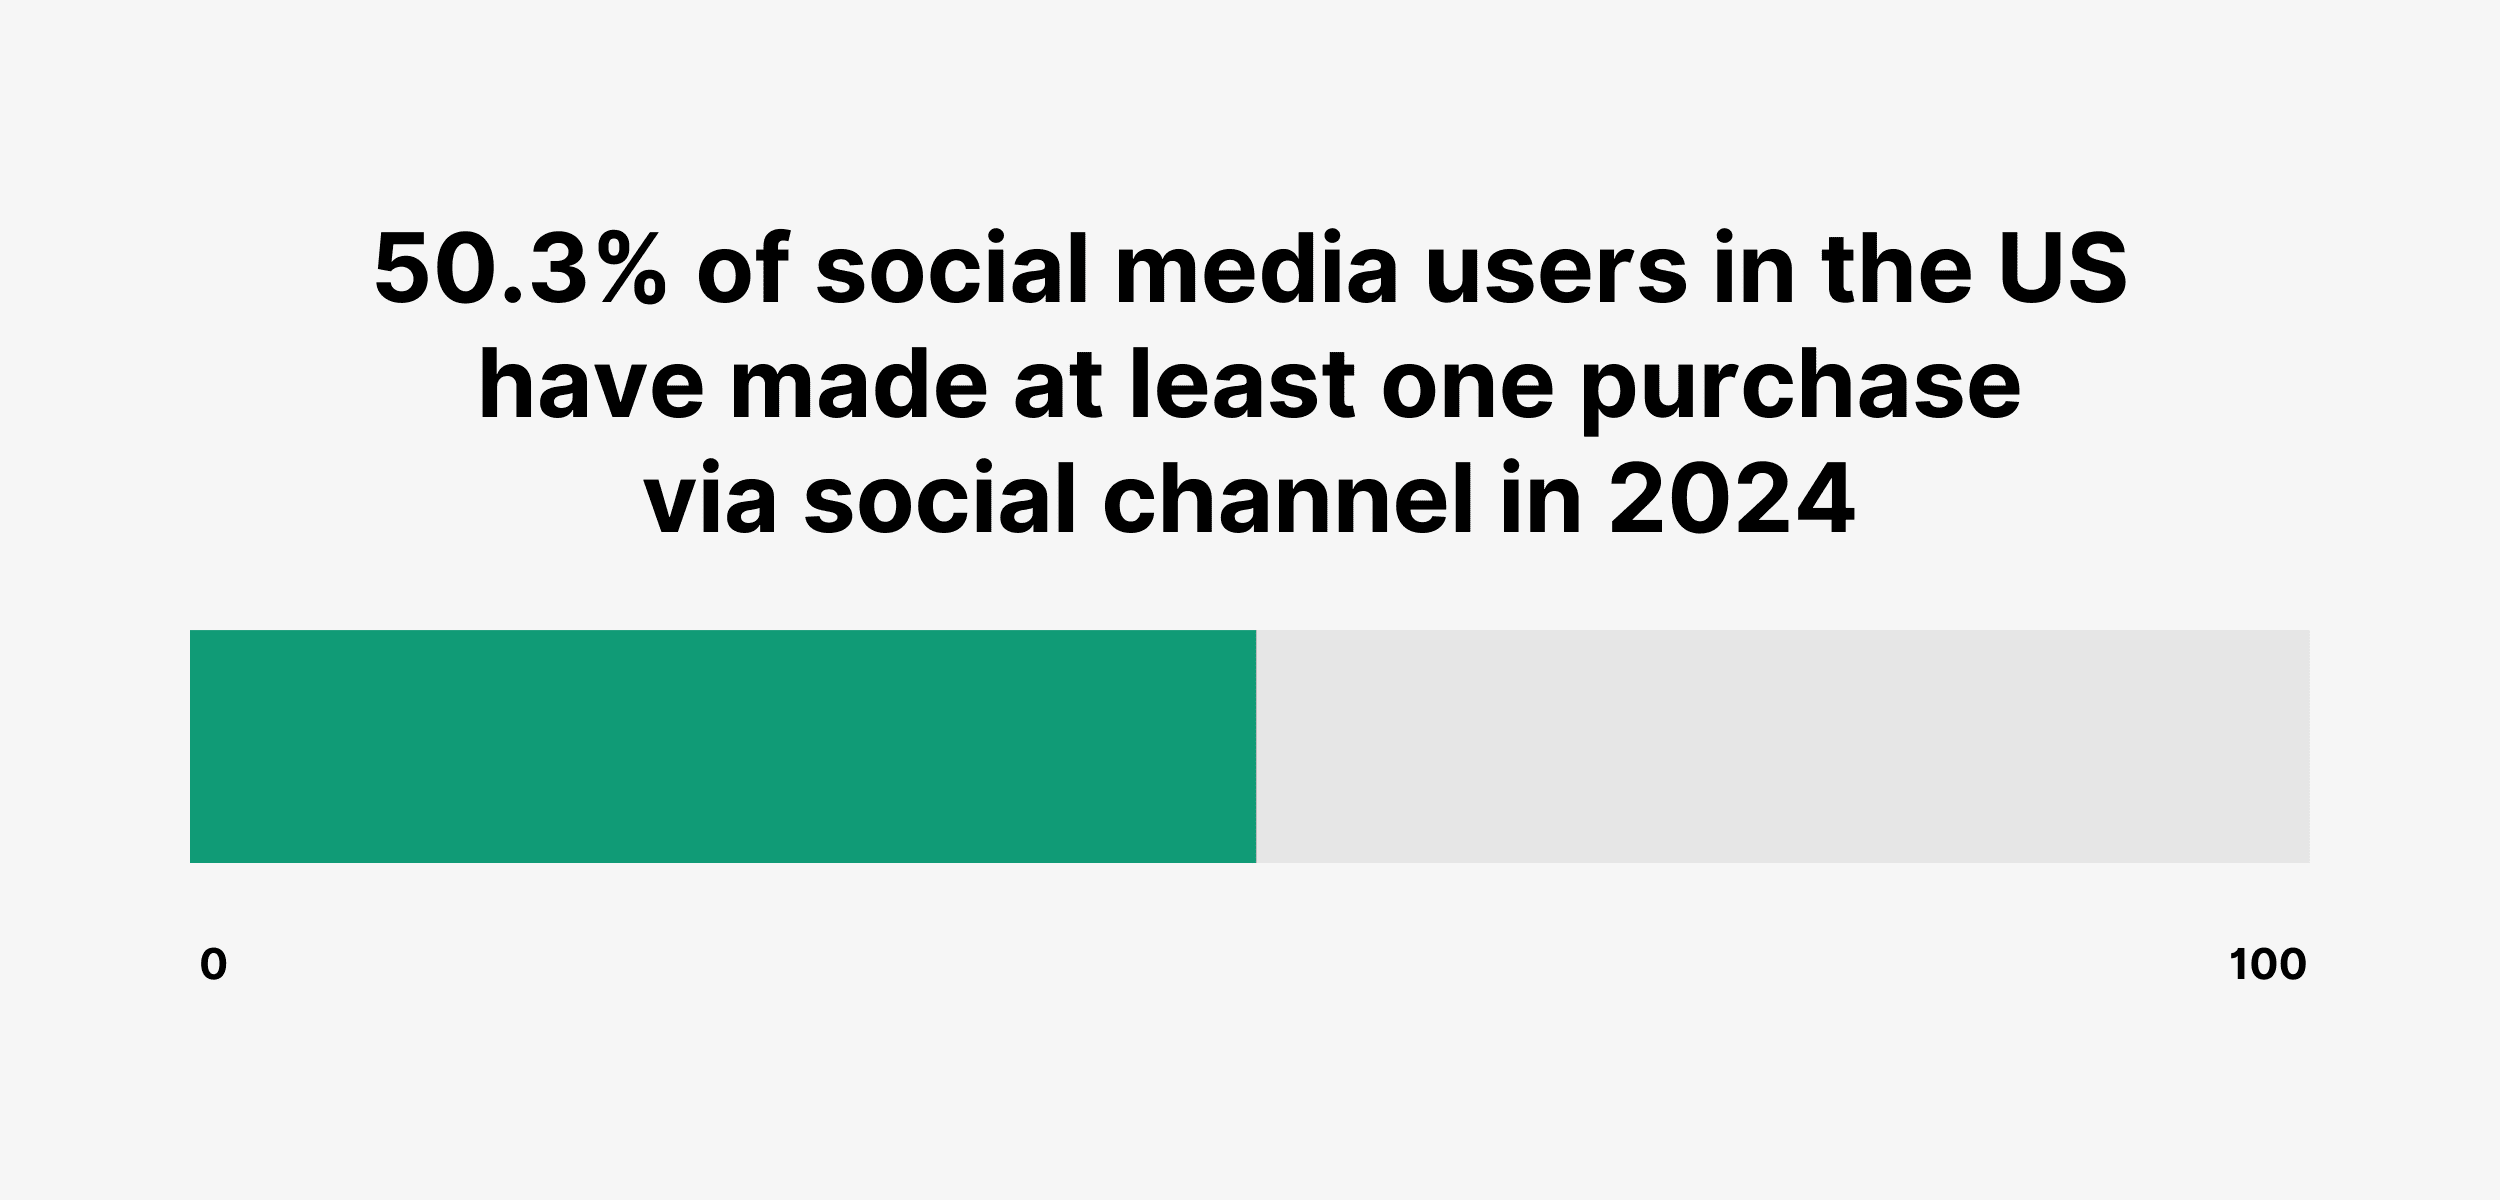 50.3% of social media users in the US have made at least one purchase via social channel in 2024